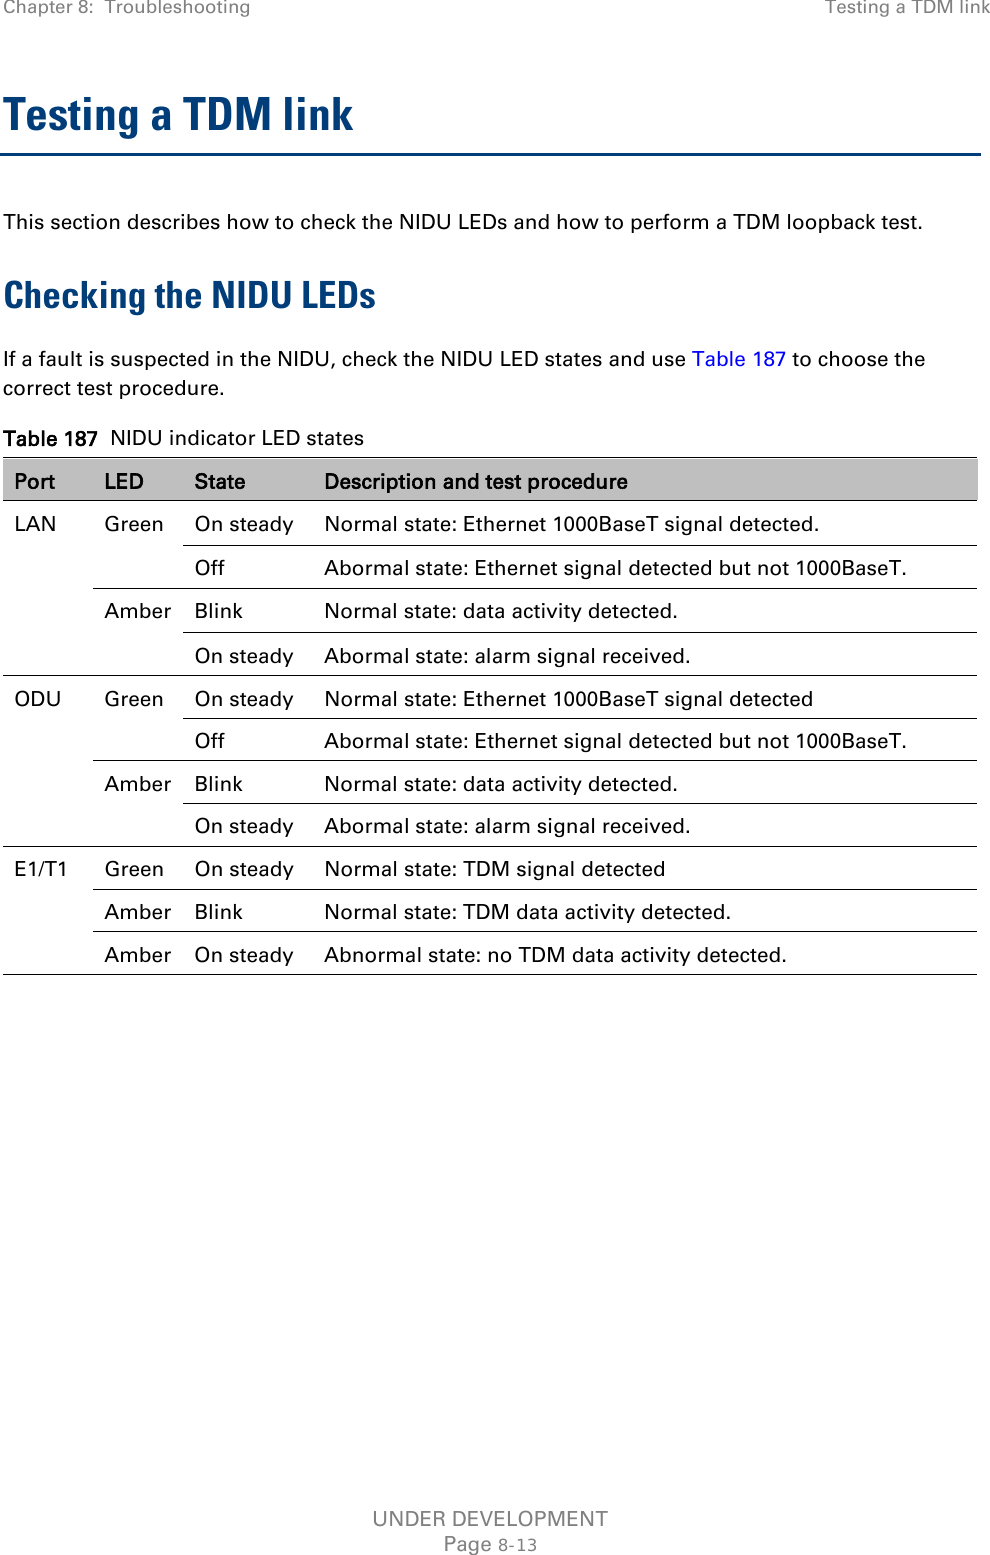 Chapter 8:  Troubleshooting Testing a TDM link  Testing a TDM link This section describes how to check the NIDU LEDs and how to perform a TDM loopback test. Checking the NIDU LEDs If a fault is suspected in the NIDU, check the NIDU LED states and use Table 187 to choose the correct test procedure. Table 187  NIDU indicator LED states Port LED State Description and test procedure LAN Green On steady Normal state: Ethernet 1000BaseT signal detected. Off Abormal state: Ethernet signal detected but not 1000BaseT. Amber Blink Normal state: data activity detected. On steady Abormal state: alarm signal received. ODU Green On steady Normal state: Ethernet 1000BaseT signal detected Off Abormal state: Ethernet signal detected but not 1000BaseT. Amber Blink Normal state: data activity detected. On steady Abormal state: alarm signal received. E1/T1 Green On steady Normal state: TDM signal detected Amber Blink Normal state: TDM data activity detected. Amber On steady Abnormal state: no TDM data activity detected.      UNDER DEVELOPMENT Page 8-13 